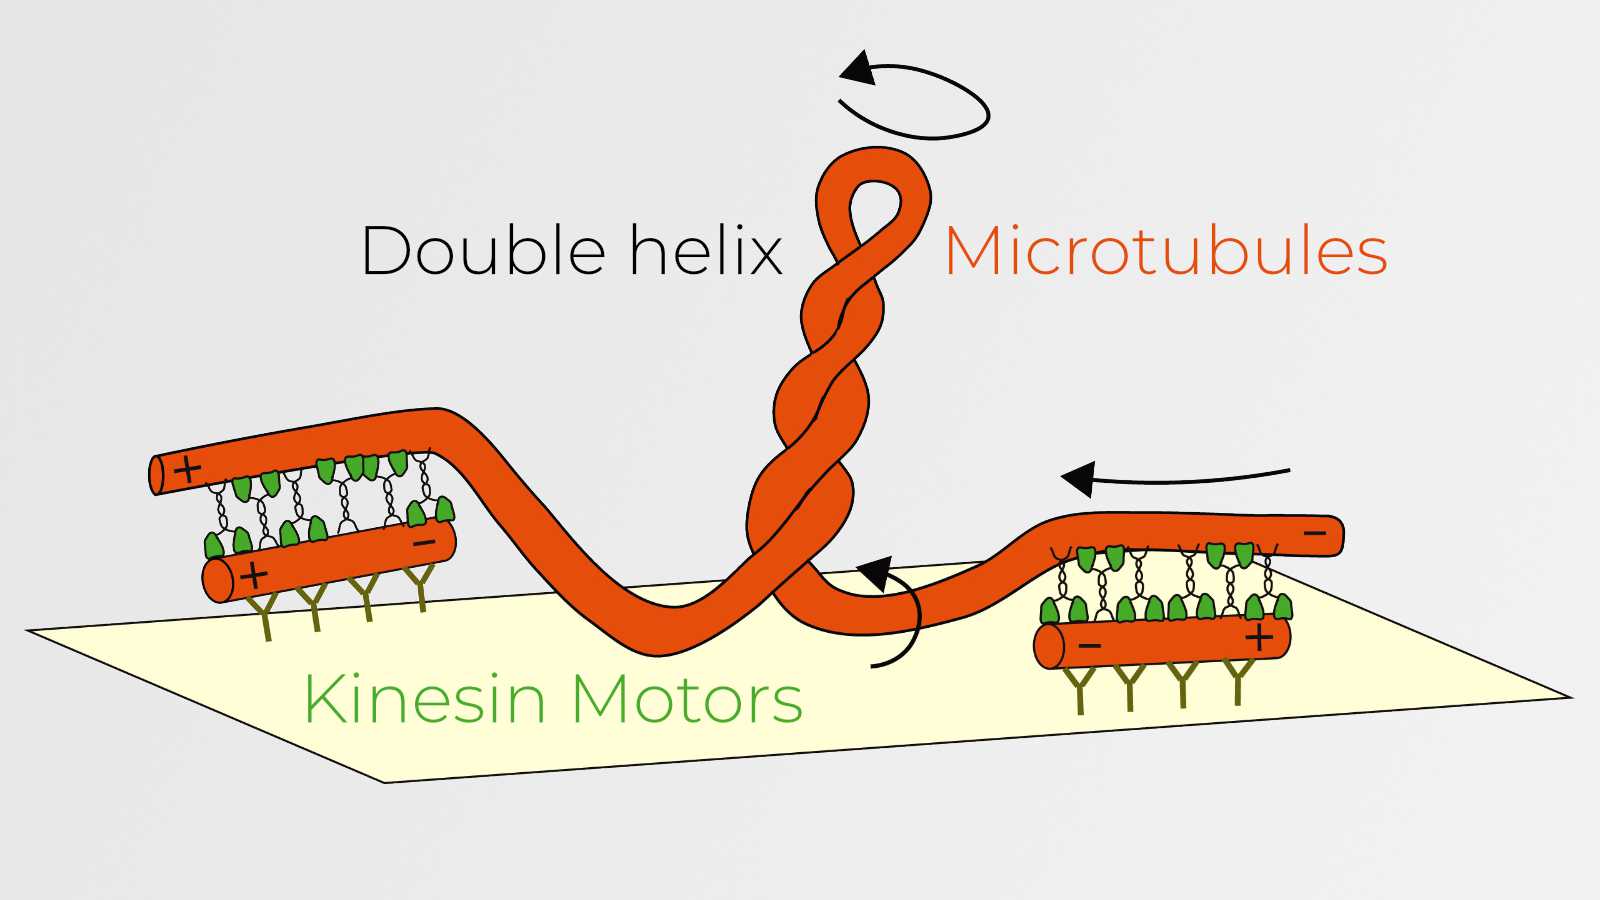 Schematic showing the generation of twist and torque between cross-linked microtubules